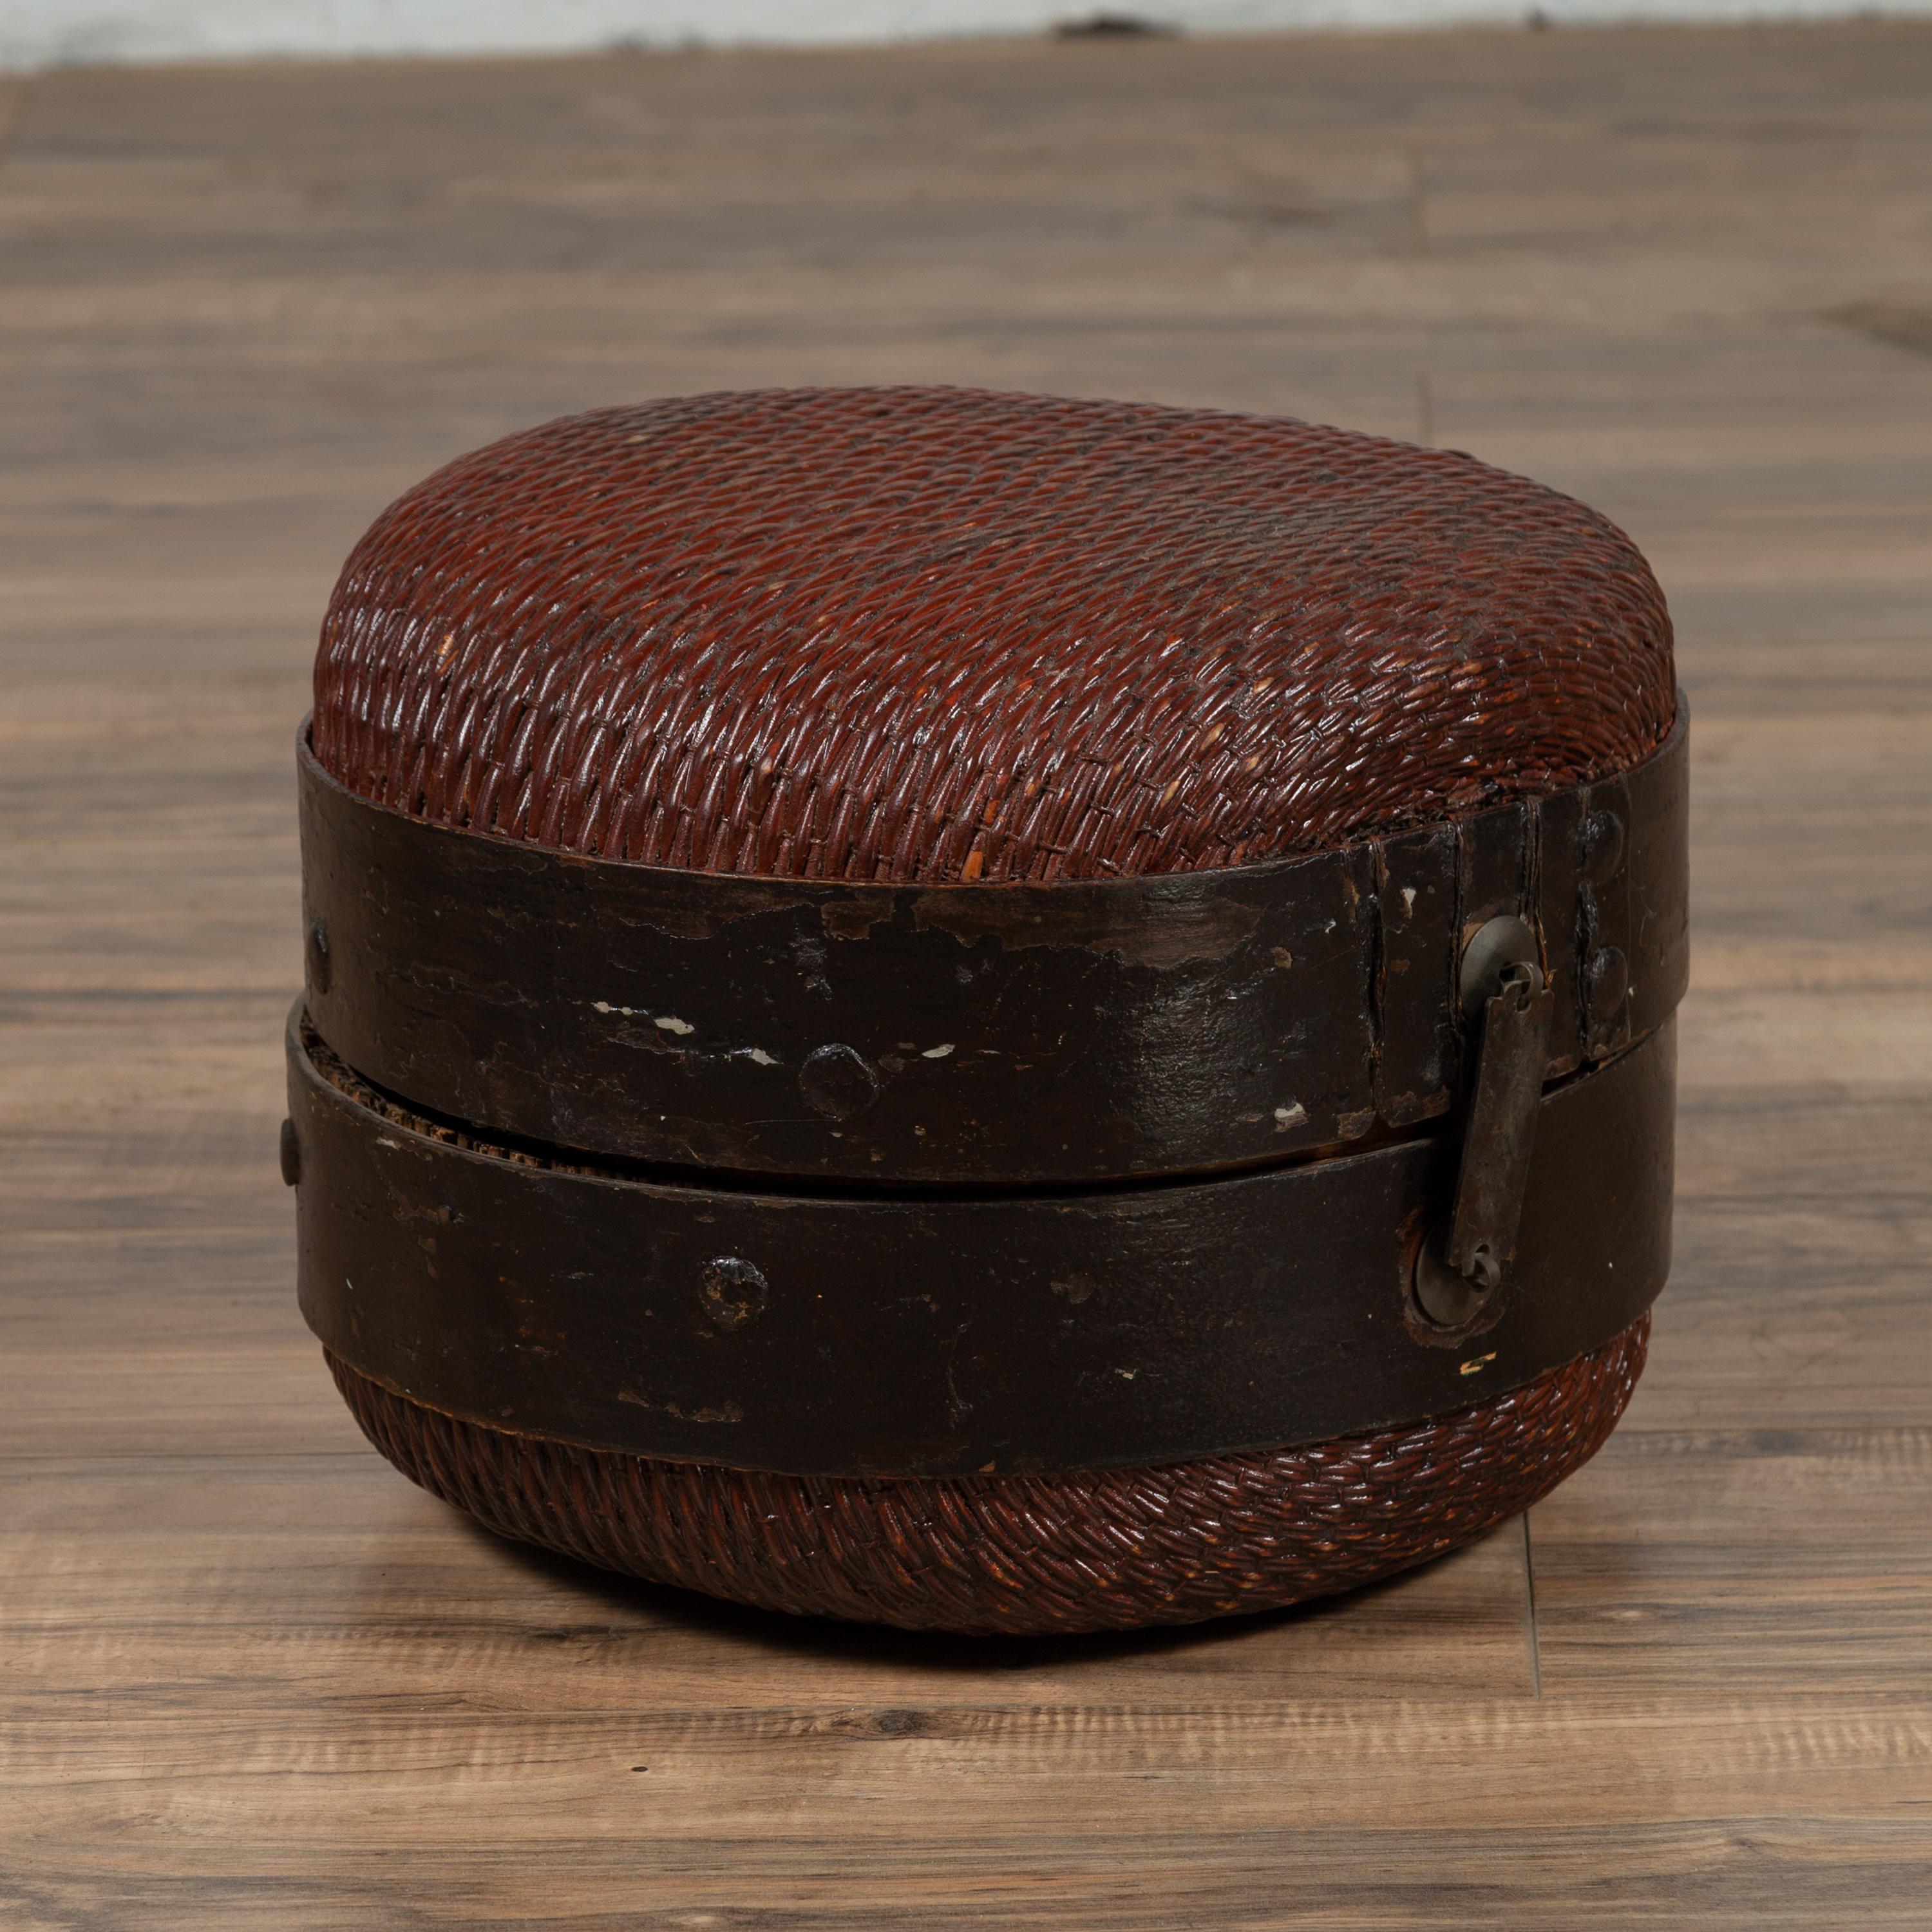 An antique Chinese rattan hat box from the early 20th century with weathered patina. We have similar ones available. Born in China during the early years of the 20th century, this rustic hat box features a rattan body, secured in the middle by dark